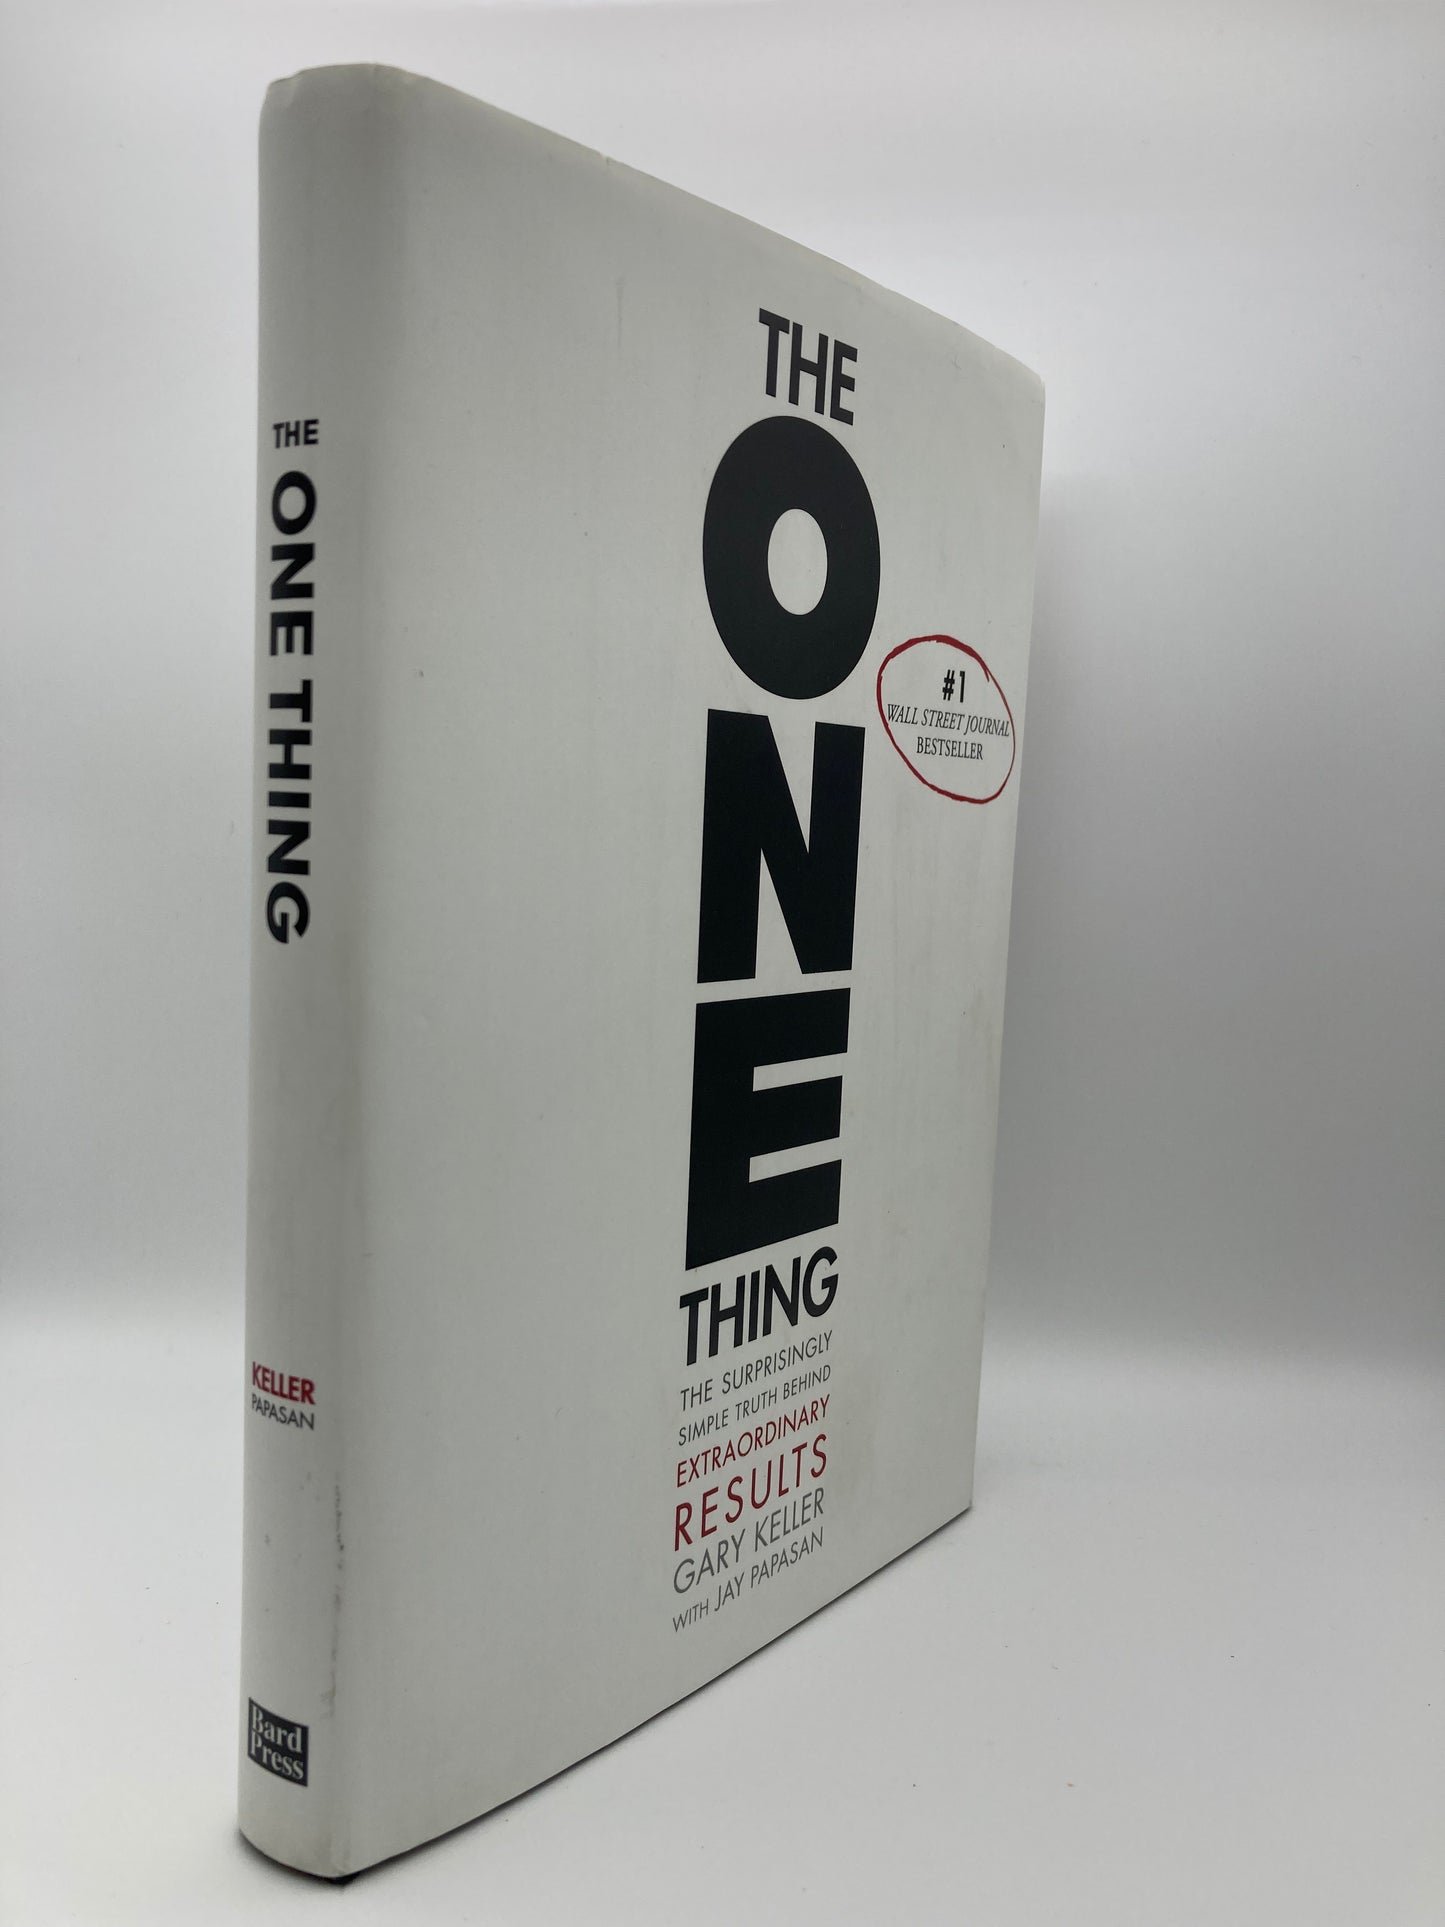 The ONE Thing: The Surprisingly Simple Truth About Extraordinary Results